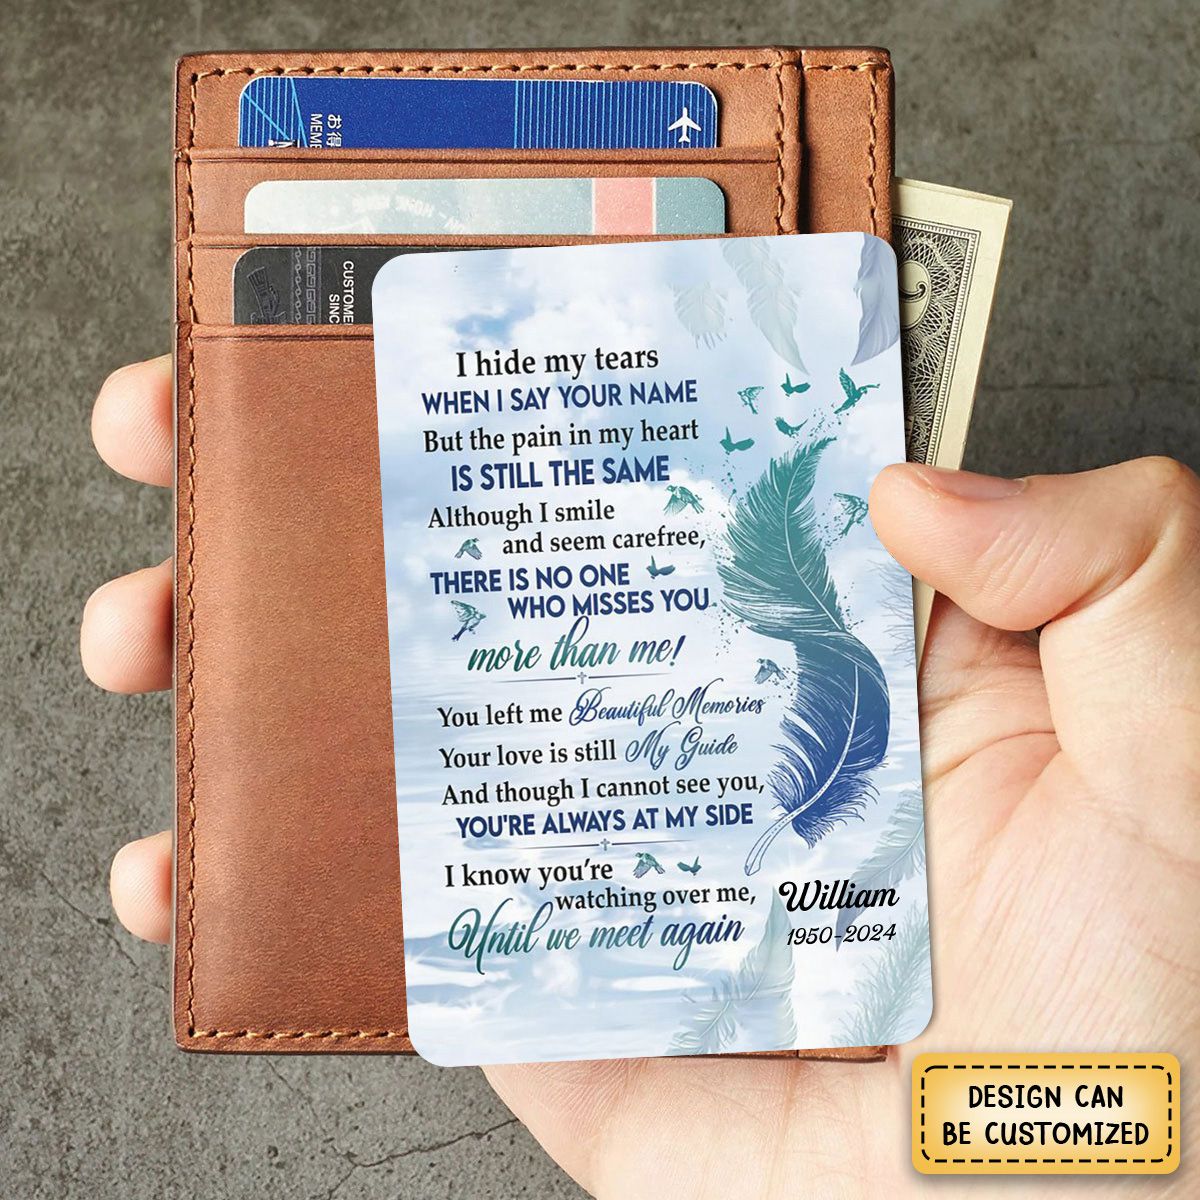 I Hide My Tears When I Say Your Name - Personalized Aluminum Wallet Card